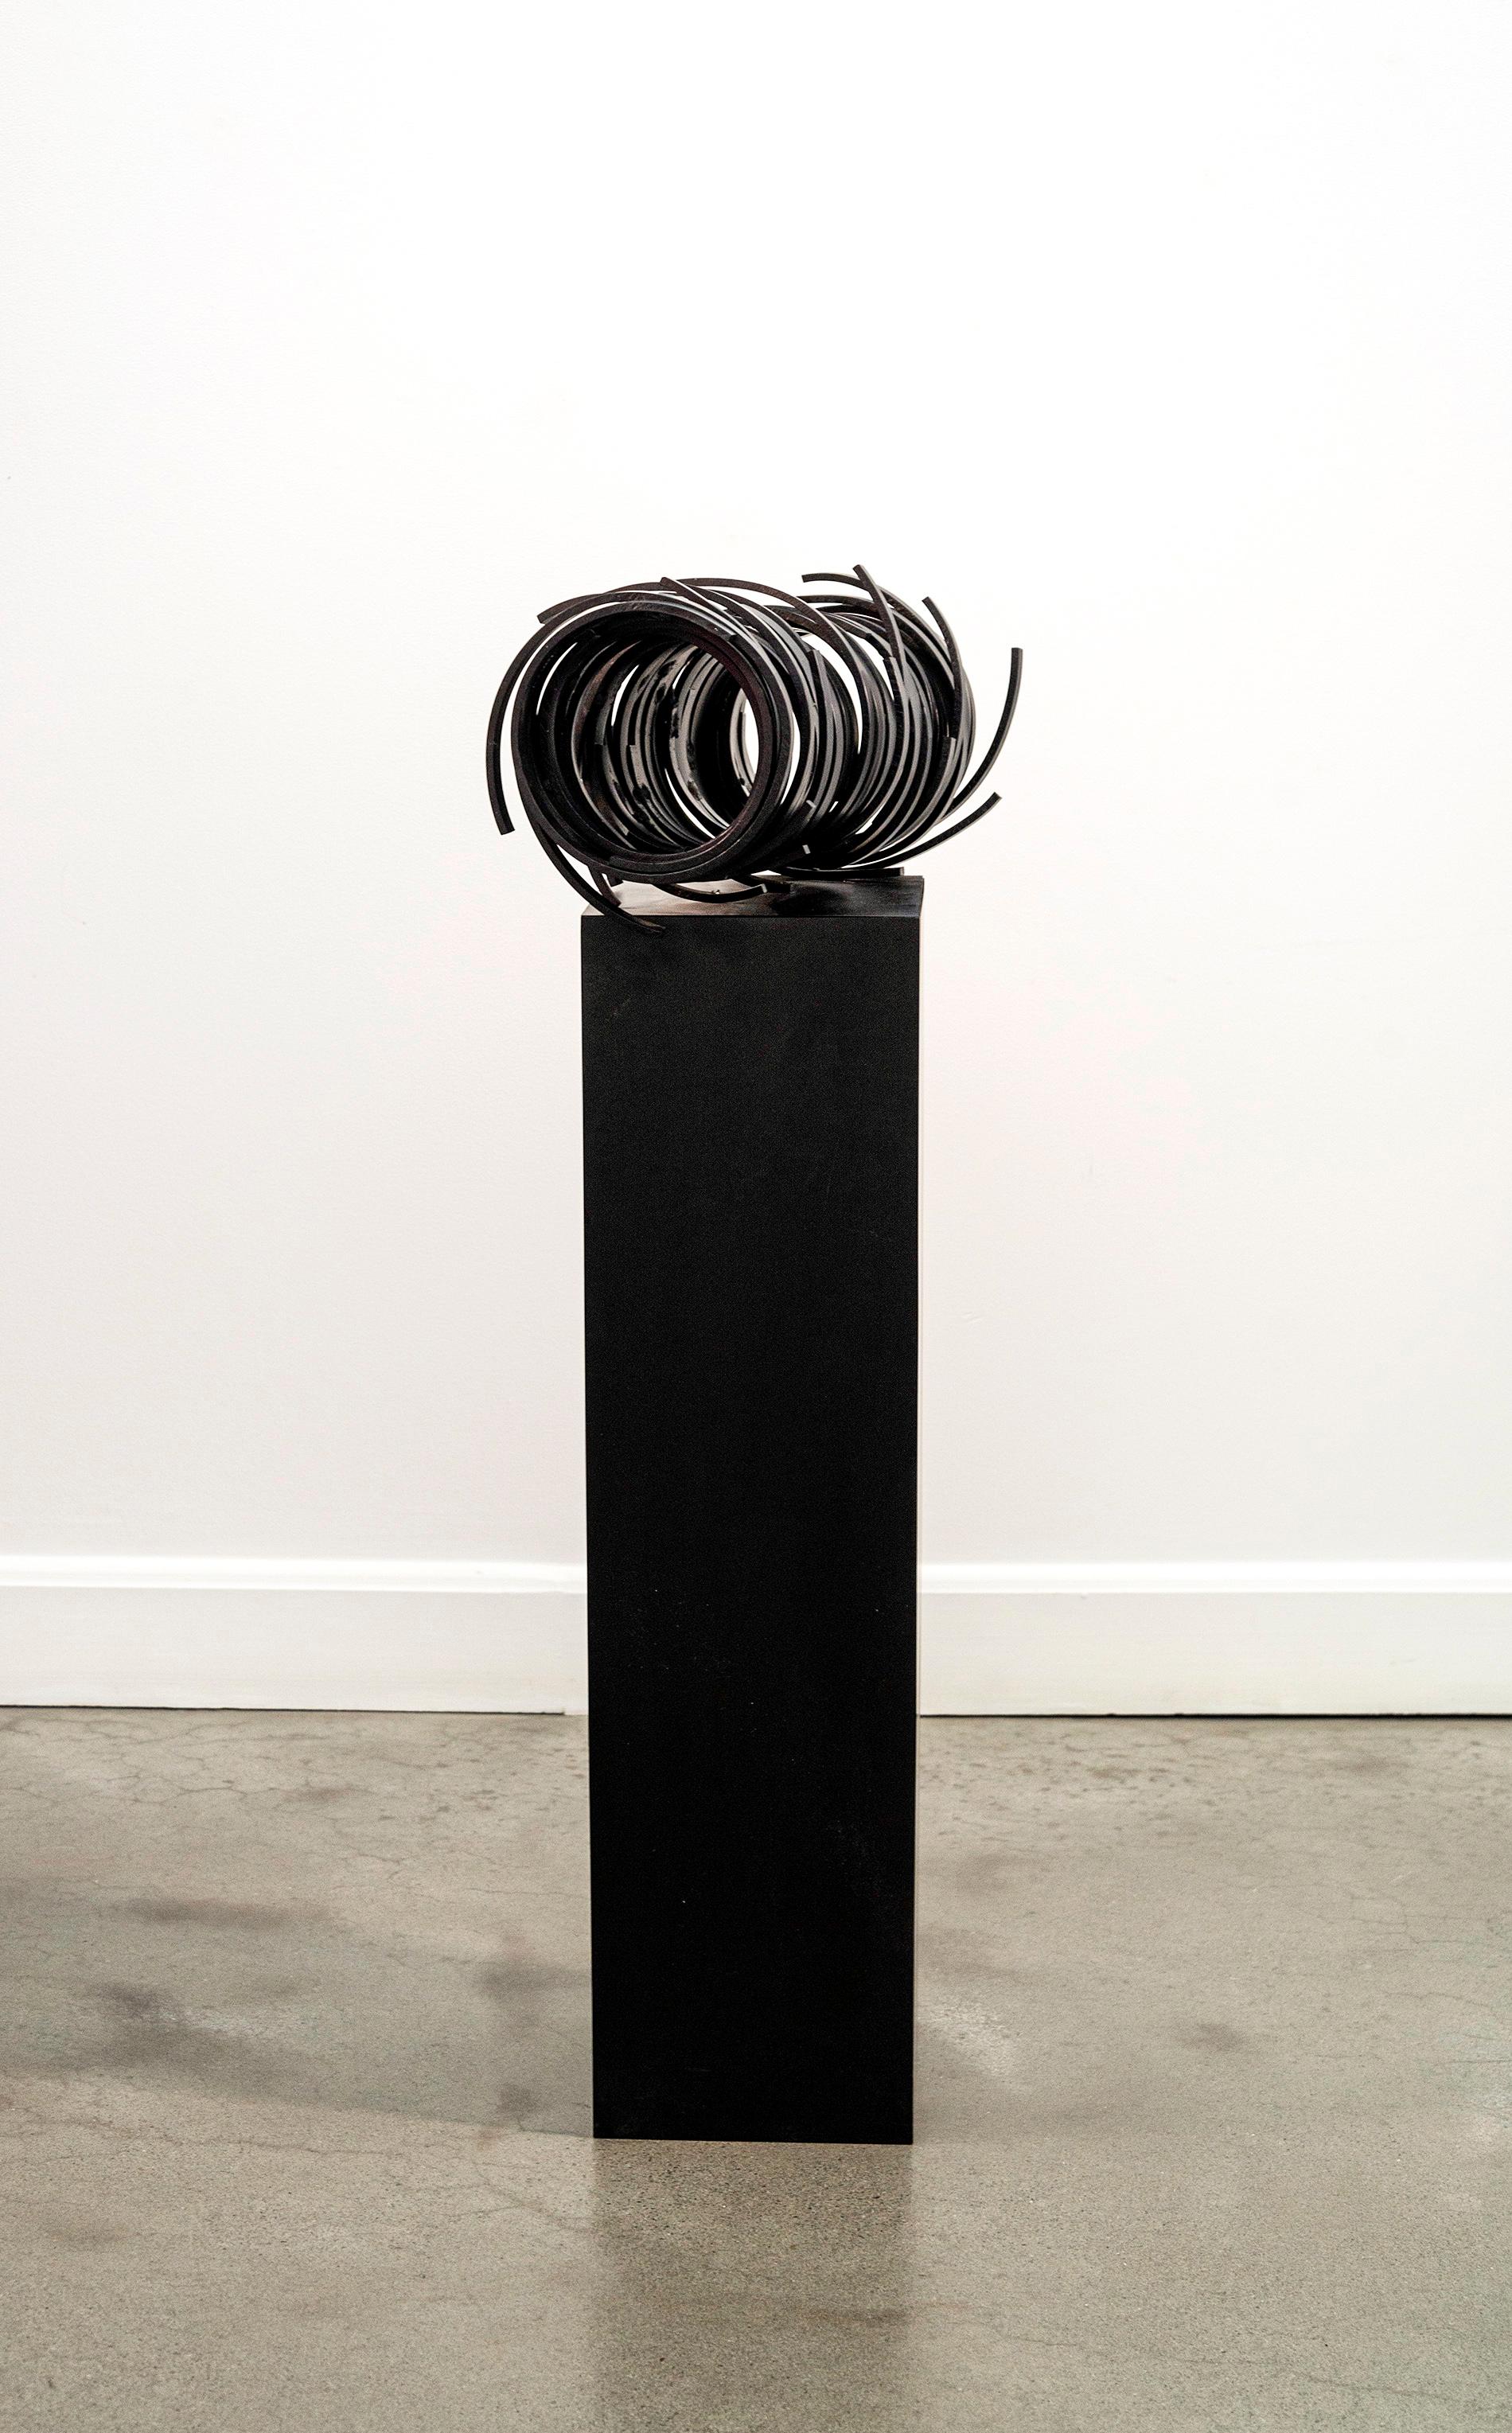 This enigmatic and intriguing sculpture is by Jean-Pierre Morin. The Quebec artist is known for his compelling contemporary work inspired by natural form. This piece, forged from narrow strips of aluminum, are wound around one another to create a